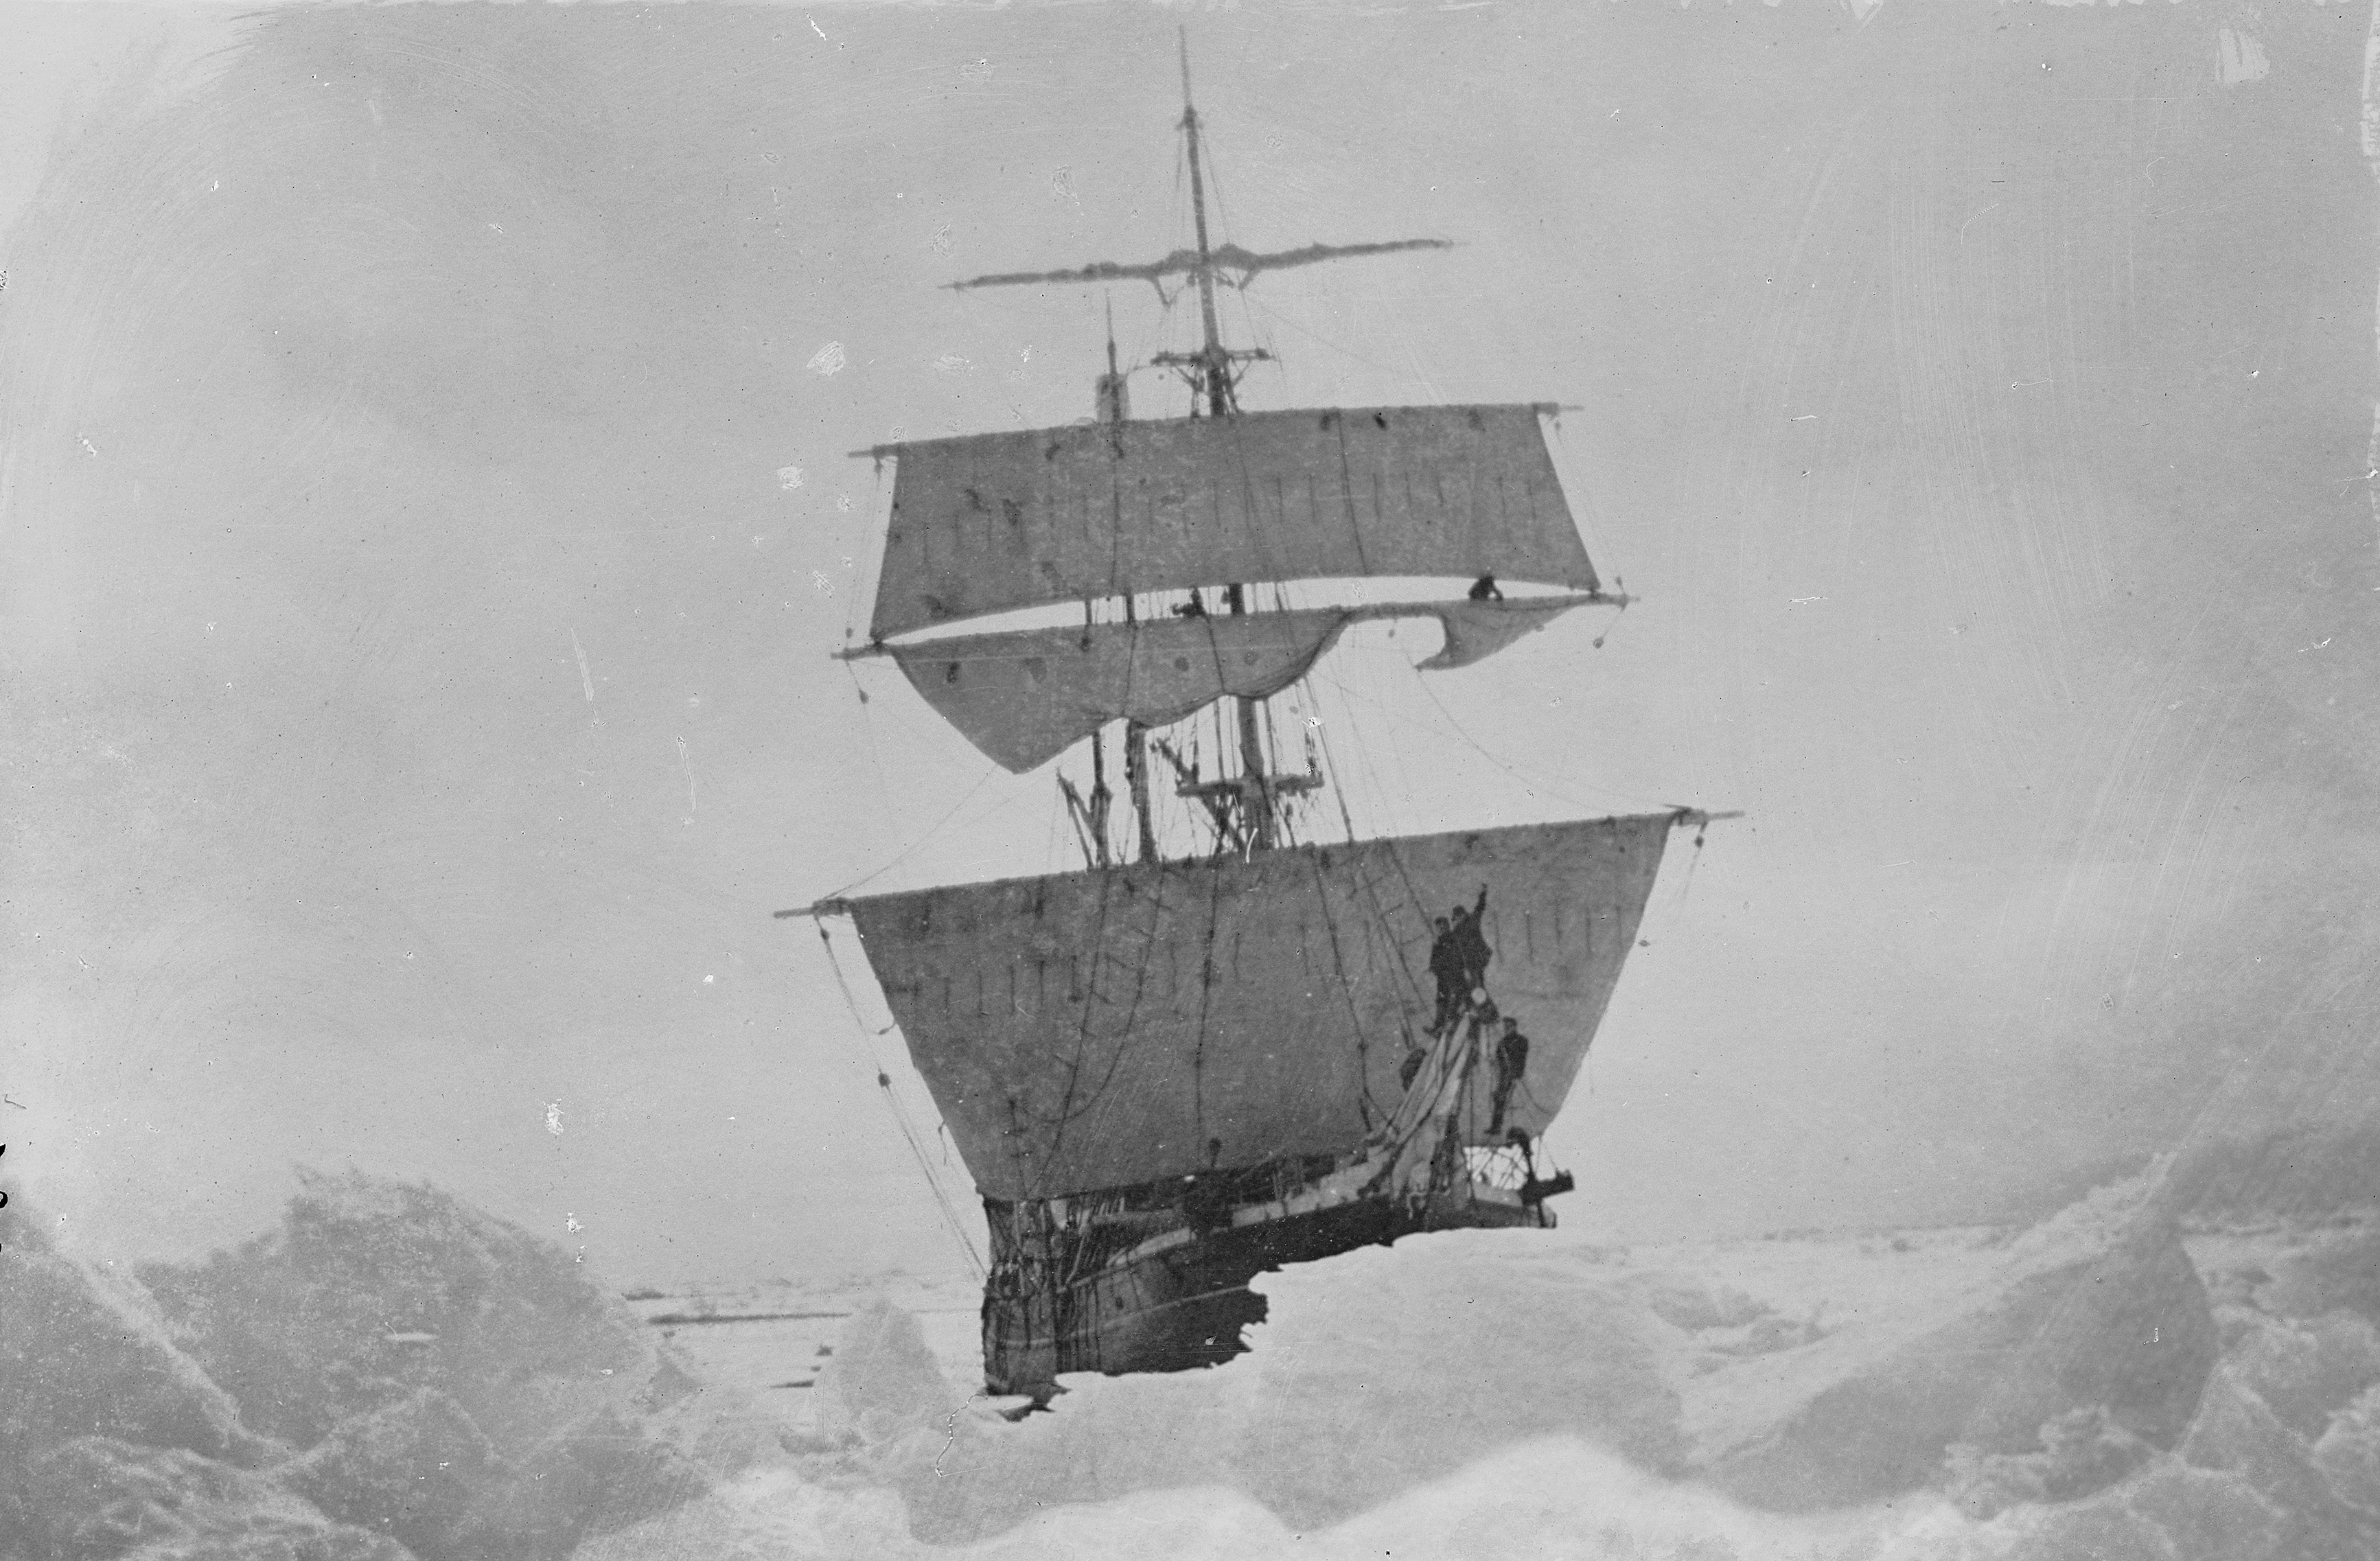 The expedition was named after their ship, Nimrod. (Scott Polar Research Institute, University of Cambridge/ PA)